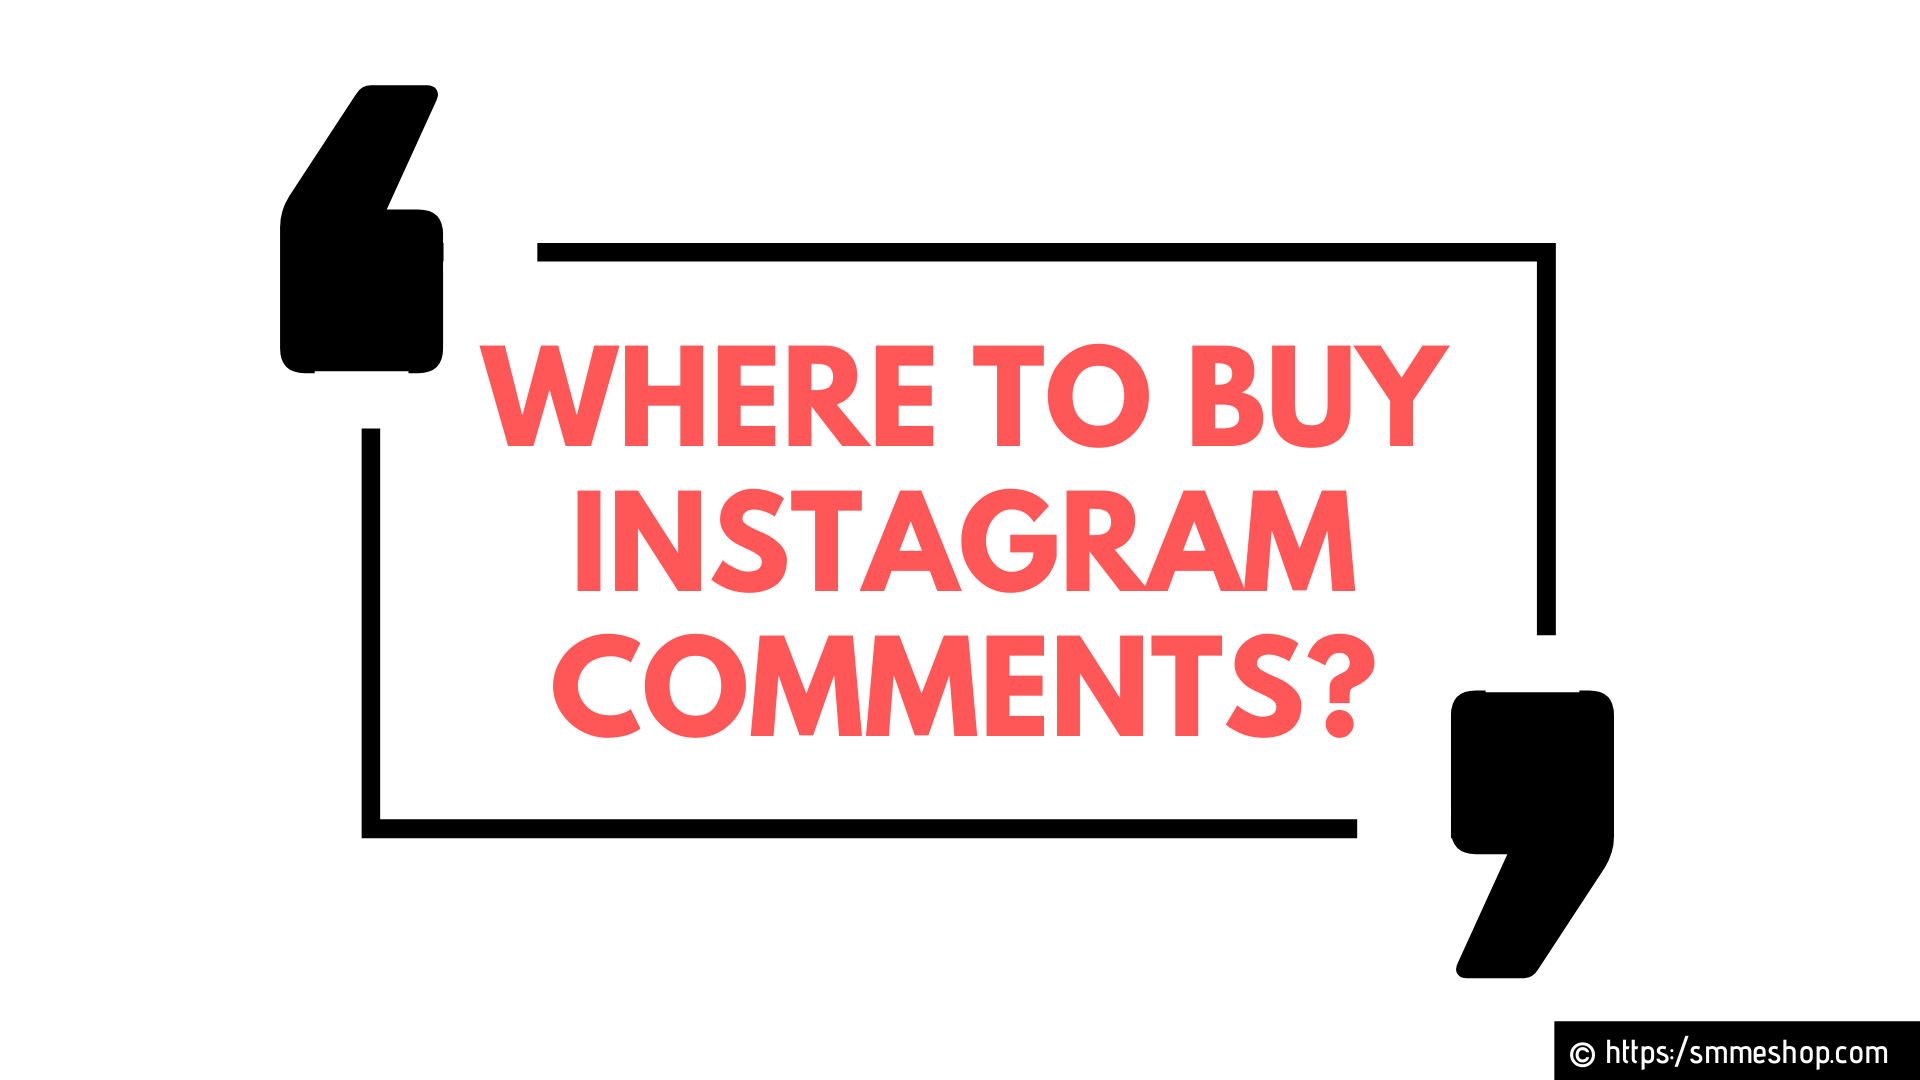 Where To Buy Instagram Comments?